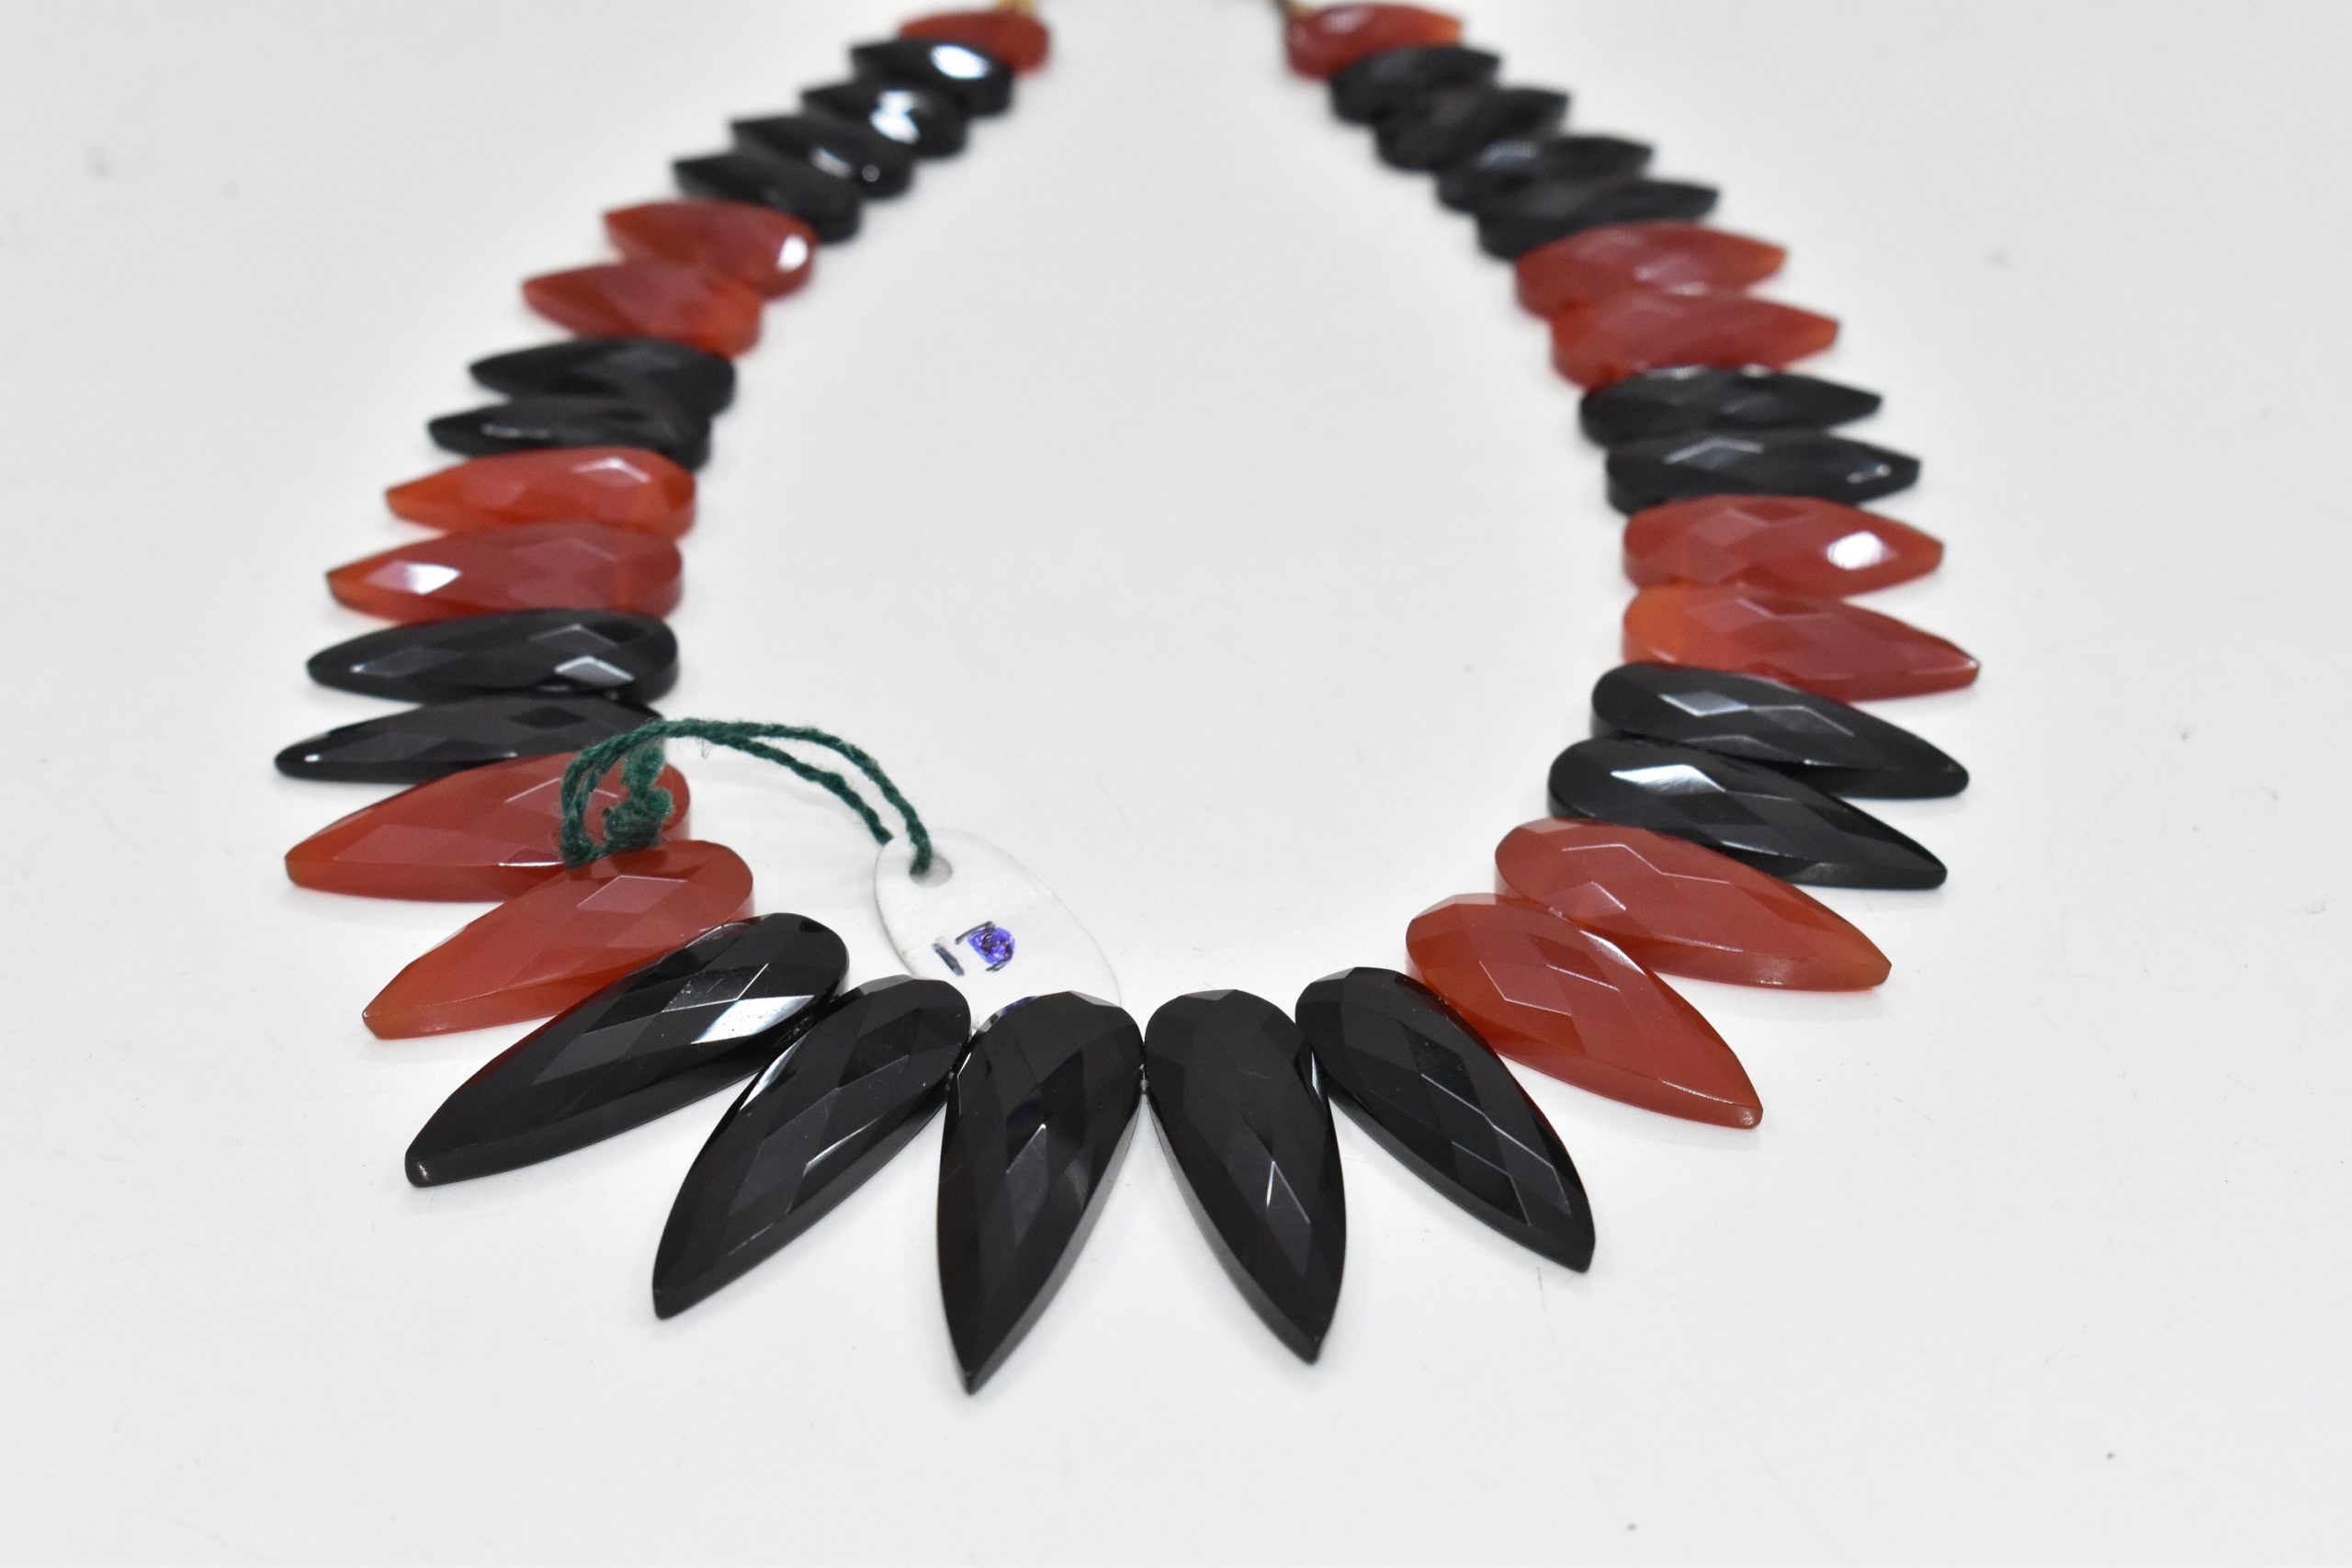 100% Natural Onyx Handmade Necklace,Collar Necklace,Princess Necklace,Choker Necklace,Bib Necklace,Matinee Necklace,Handicraft Necklace. | Save 33% - Rajasthan Living 15